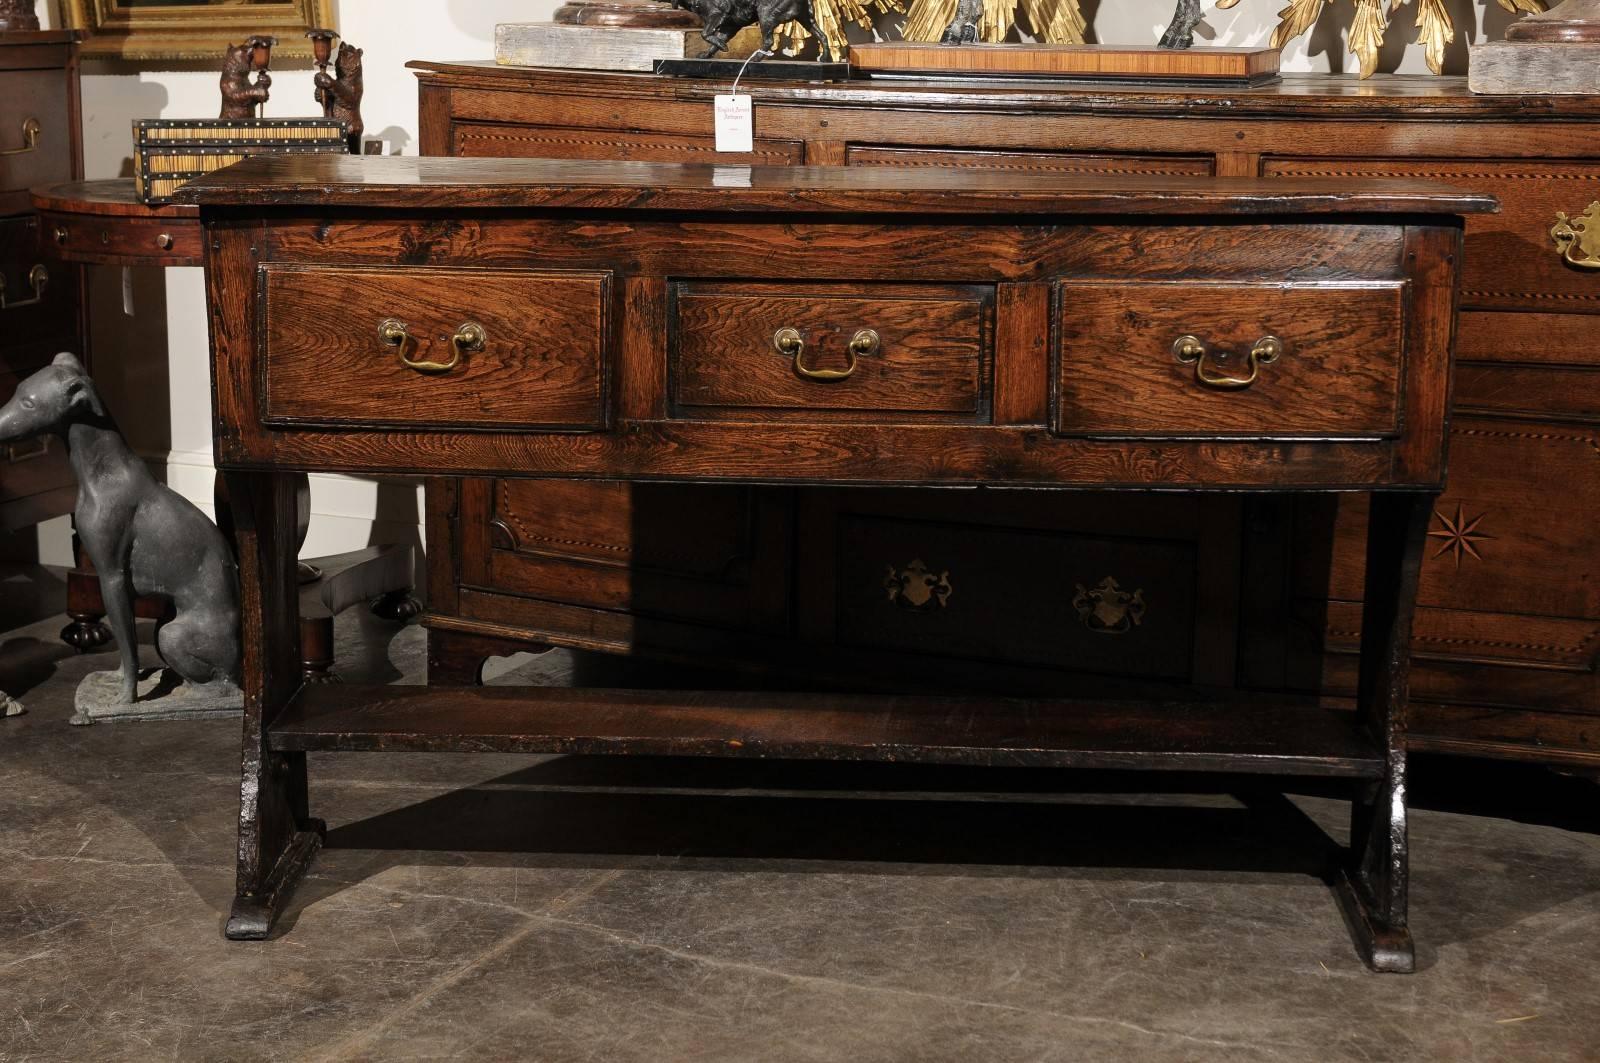 This exquisite small size English server or dresser base from the 18th century features a rectangular top over three drawers opening with brass bail handles. The server is raised on a trestle base with lower shelf, ready to showcase any beautiful